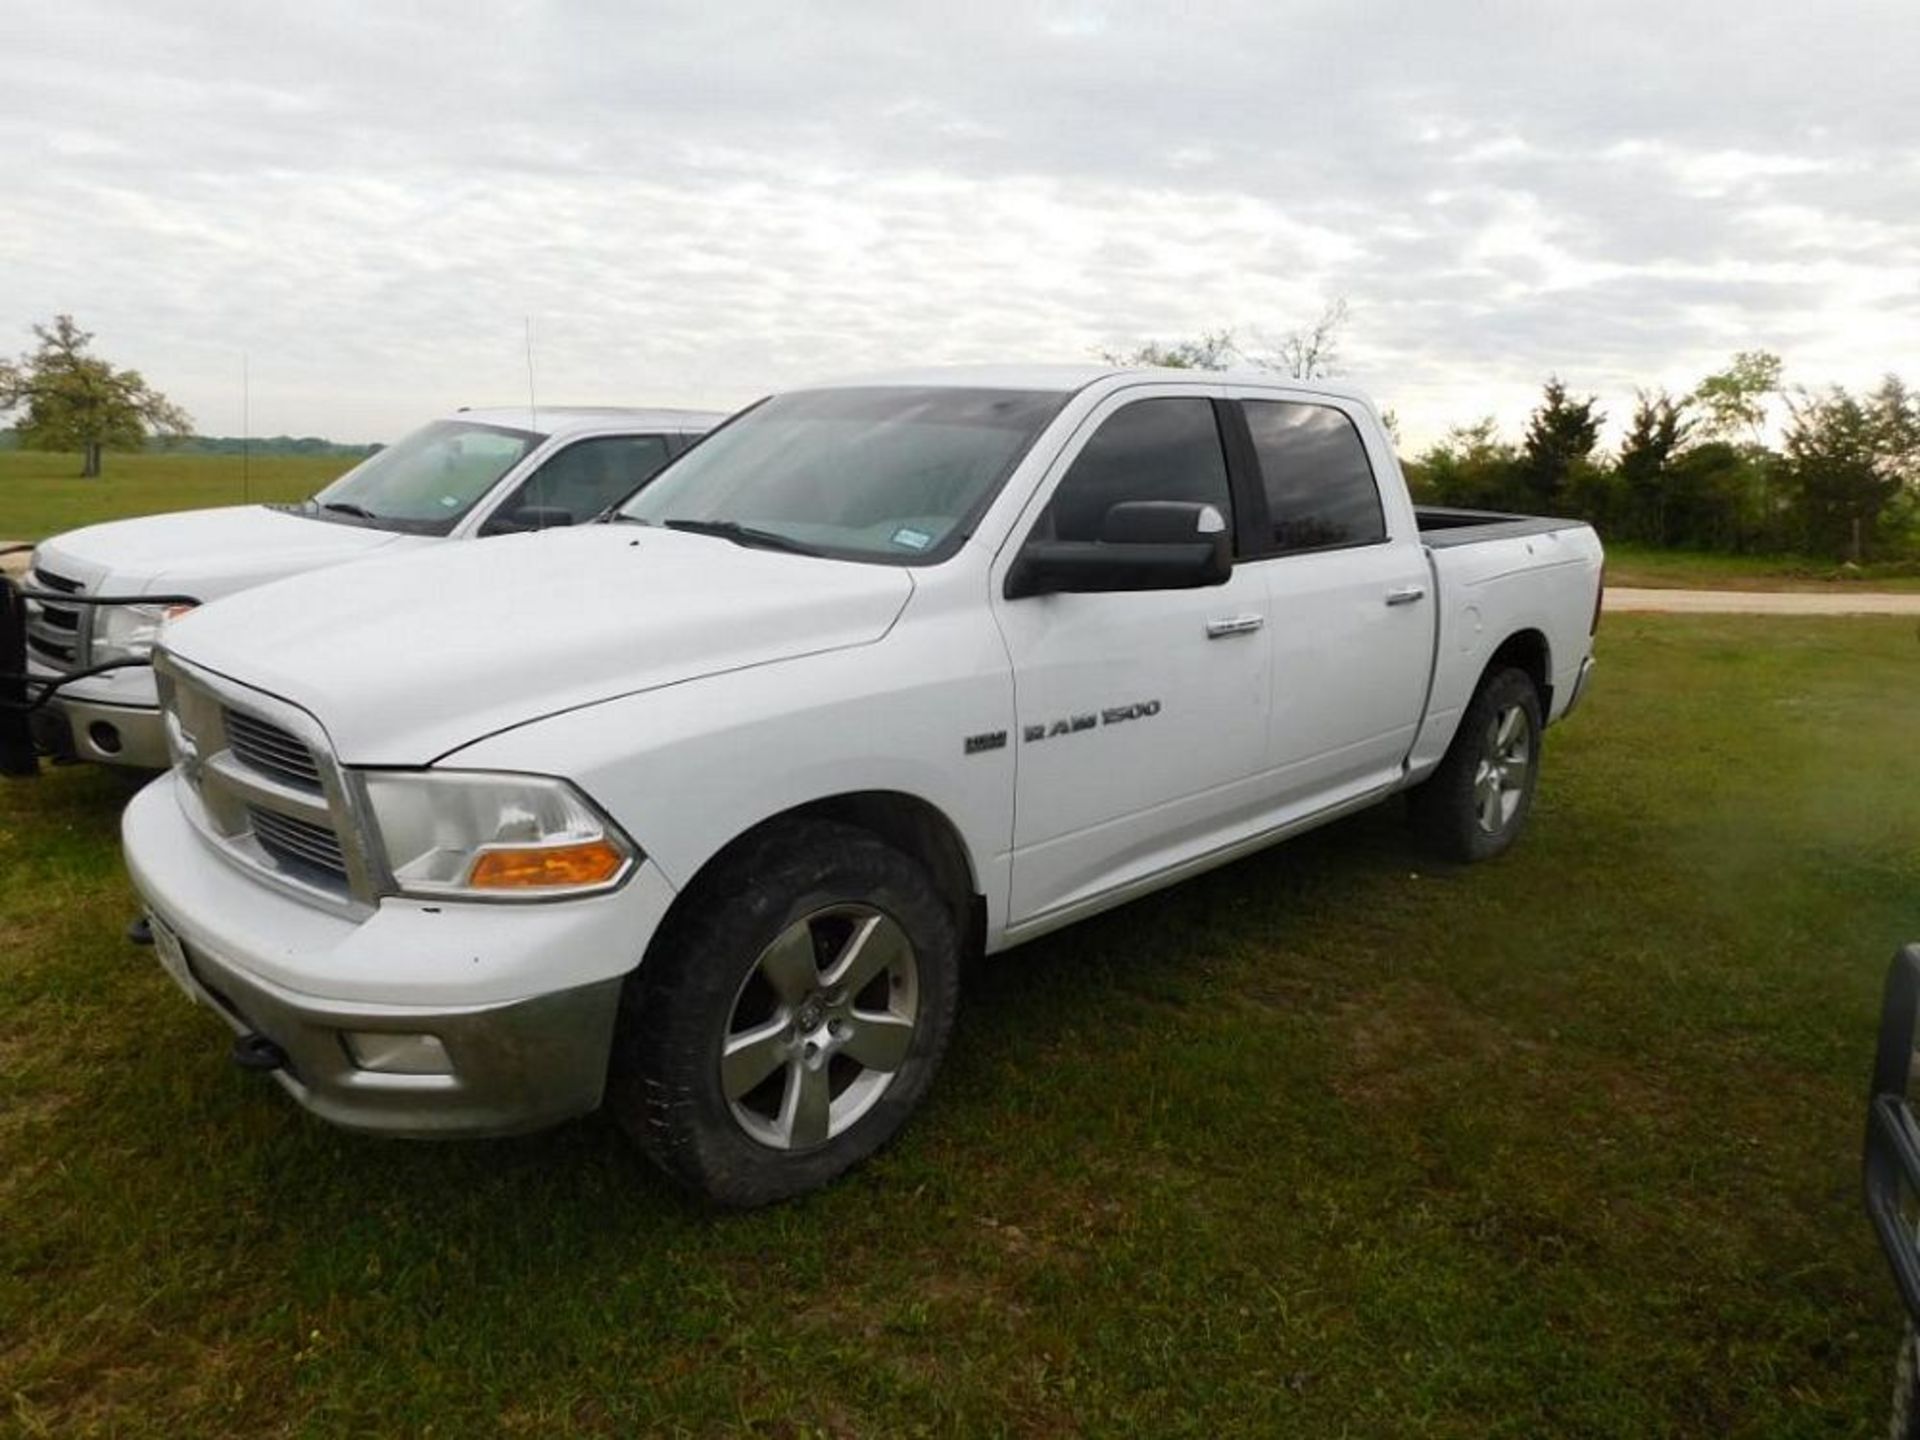 2012 Dodge Ram 1500 4x4 Crew Cab Pick-up Truck, VIN 1C6RD7LT3CS209341, 5-1/2 ft. Bed with Integral T - Image 2 of 5